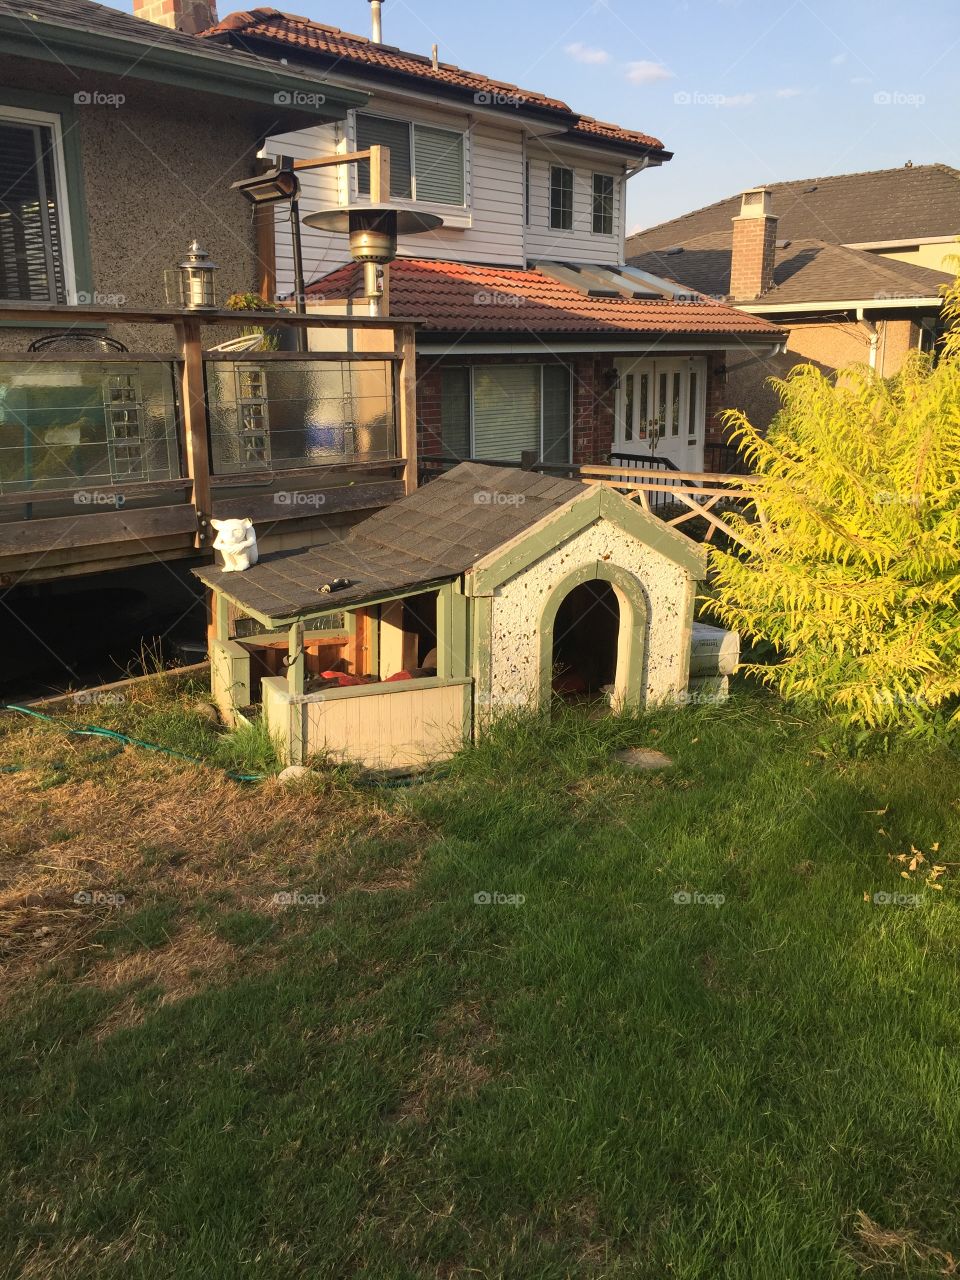 An architect’s dog house, built to look like it’s owners residence to make the dog feel more at home.